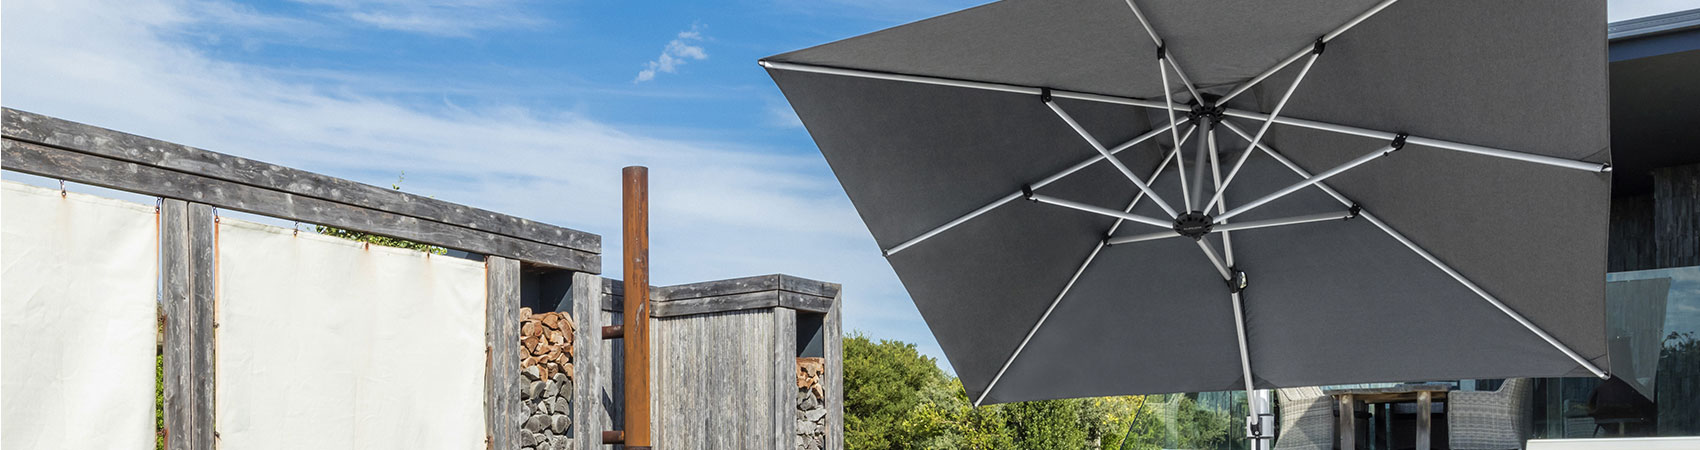 Gray Frankford Cantilever Umbrella shading the pool of a modern home